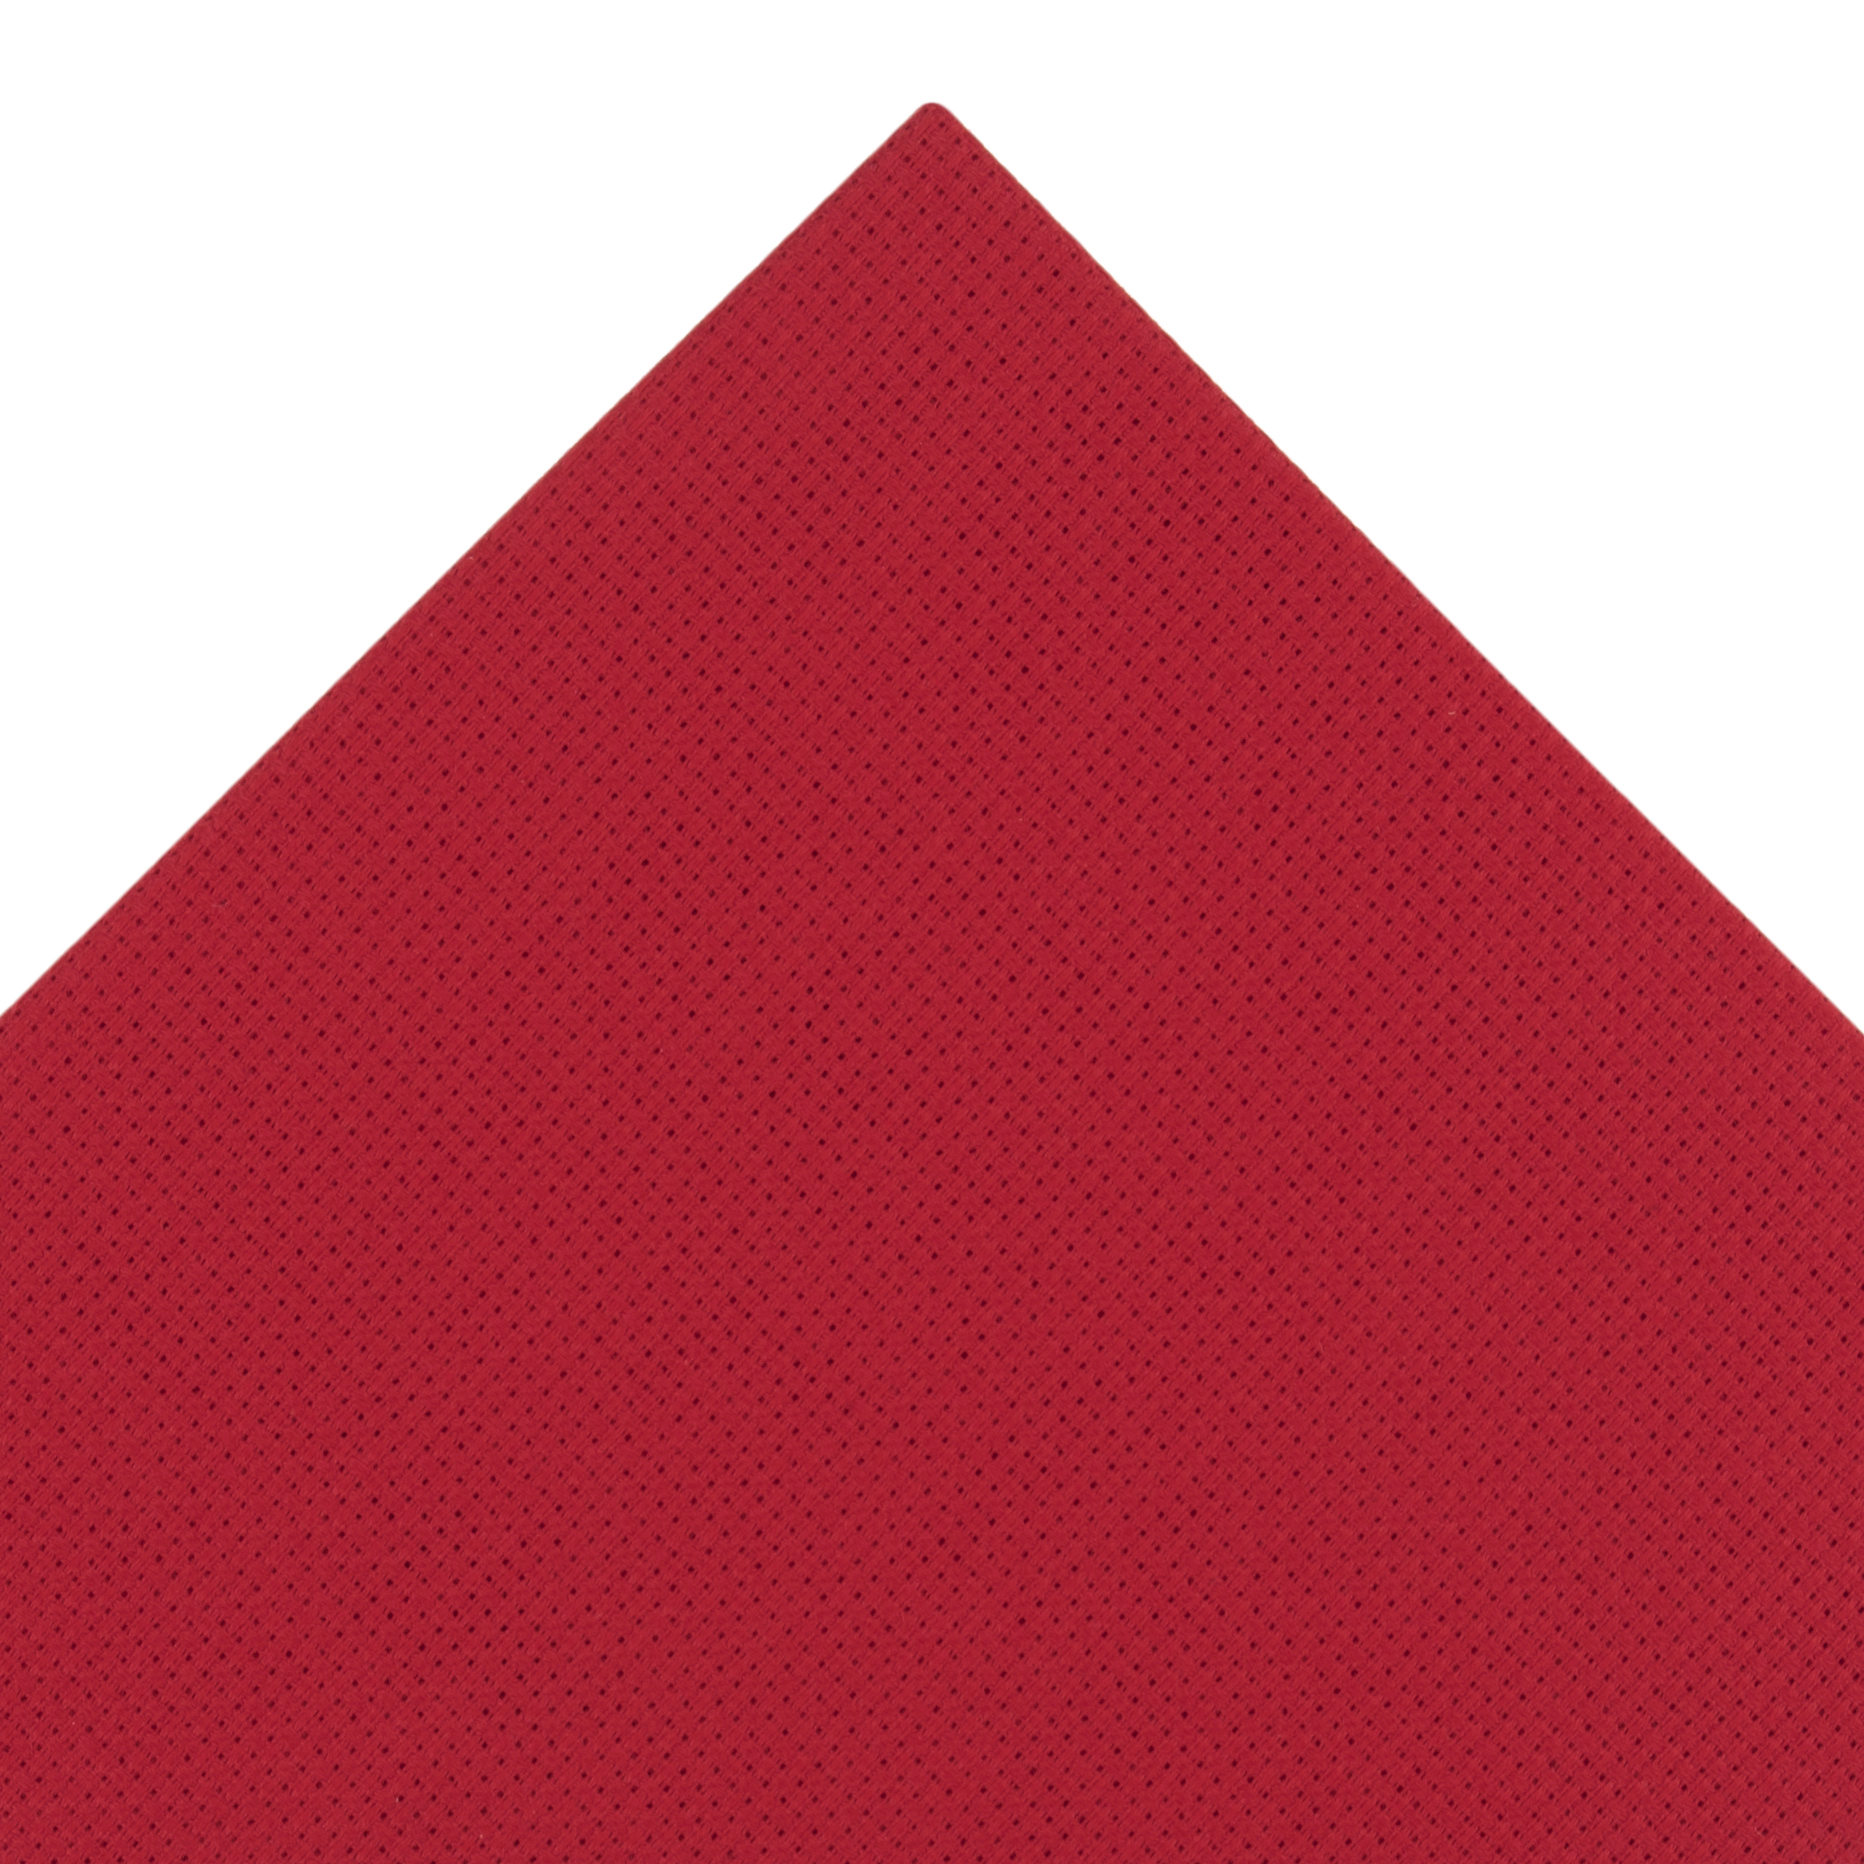 Picture of Needlecraft Fabric: Aida: 14 Count: 45 x 30cm: Red